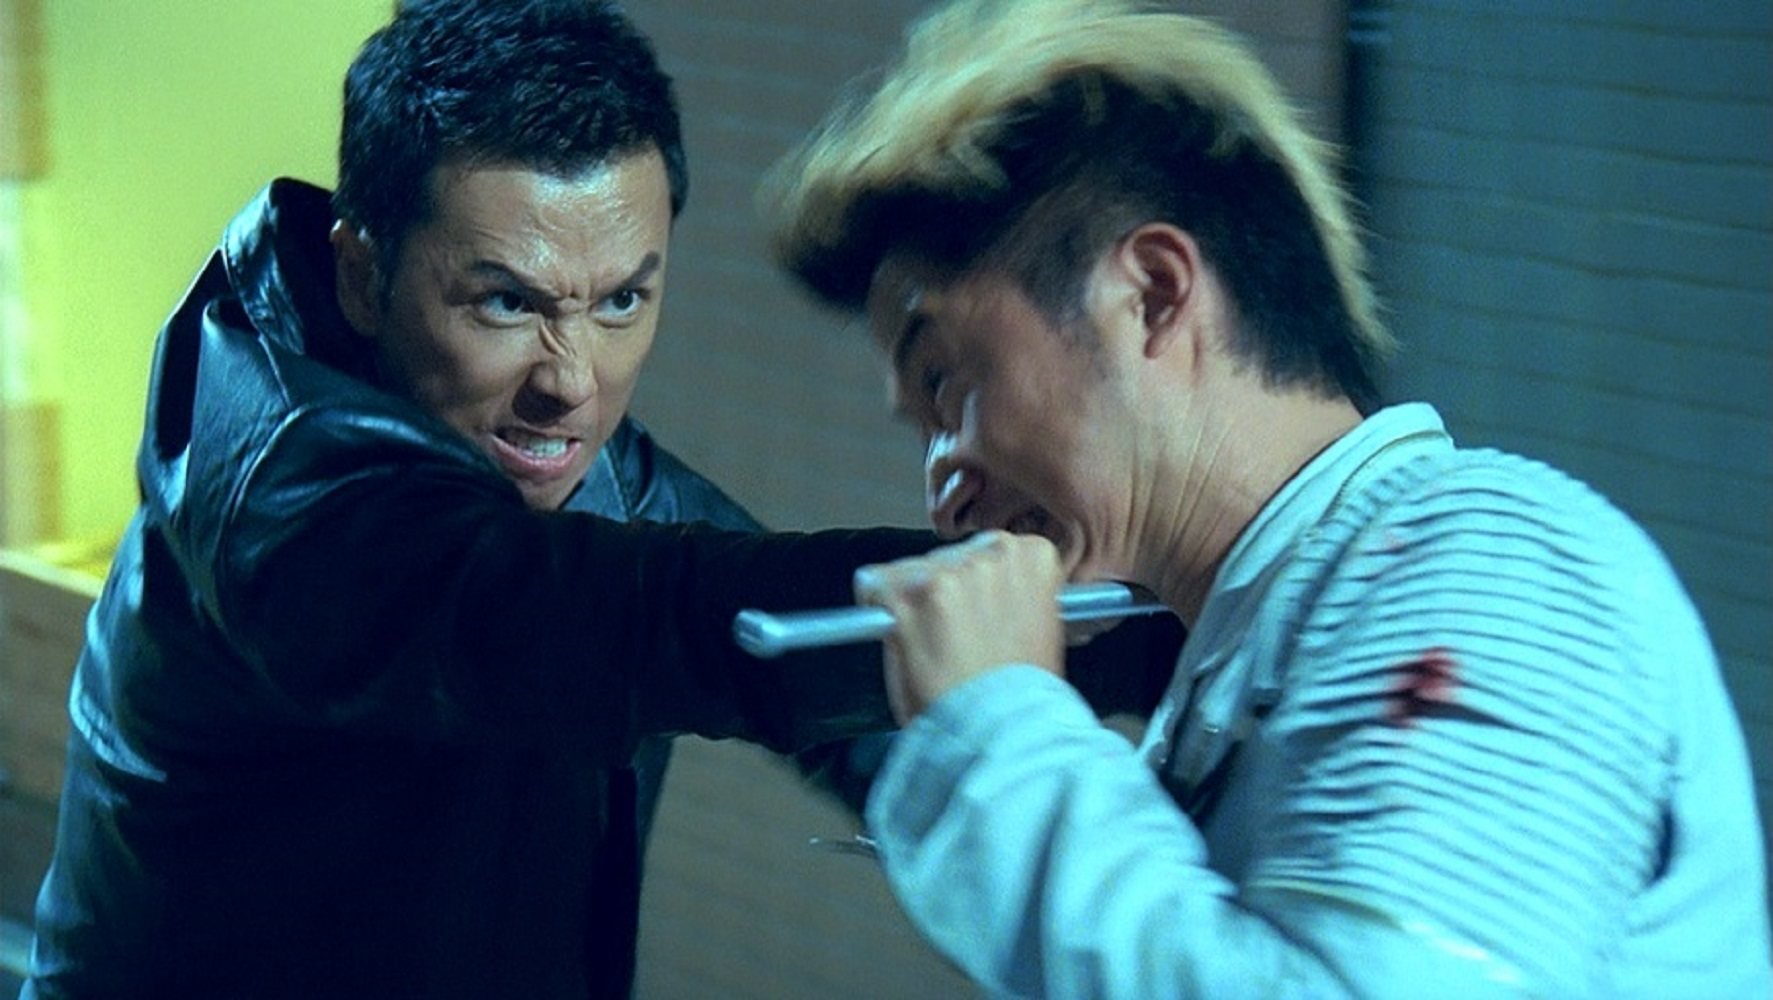 Donnie Yen (left) and Wu Jing in a still from SPL, one of our 25 best martial arts films of the 21st century. 